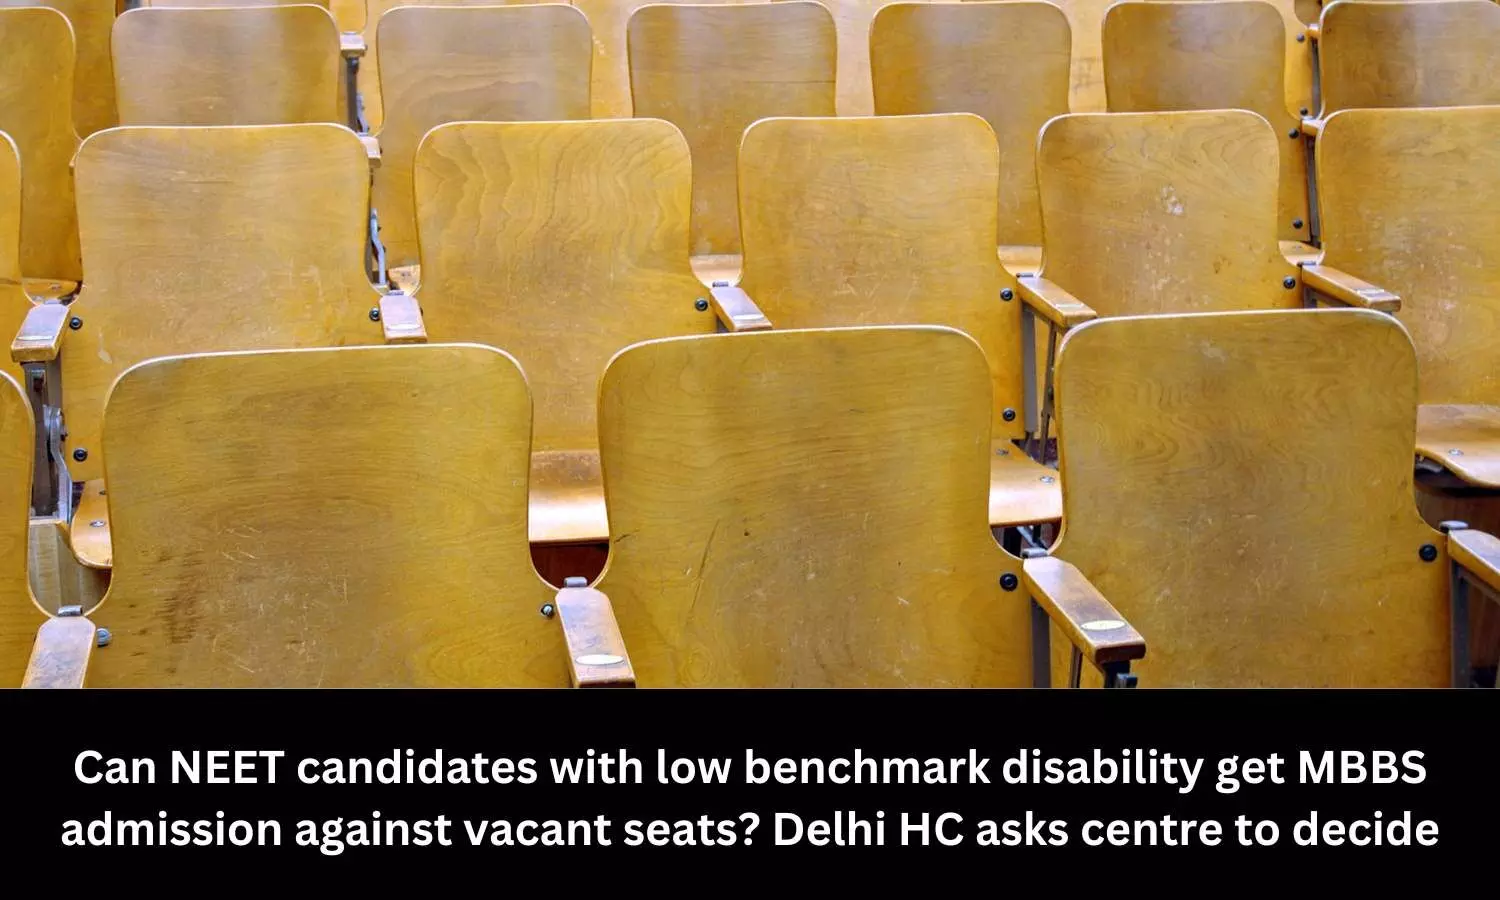 Can NEET Candidates with low benchmark disability get MBBS admission against vacant seats? Delhi HC asks Centre to decide